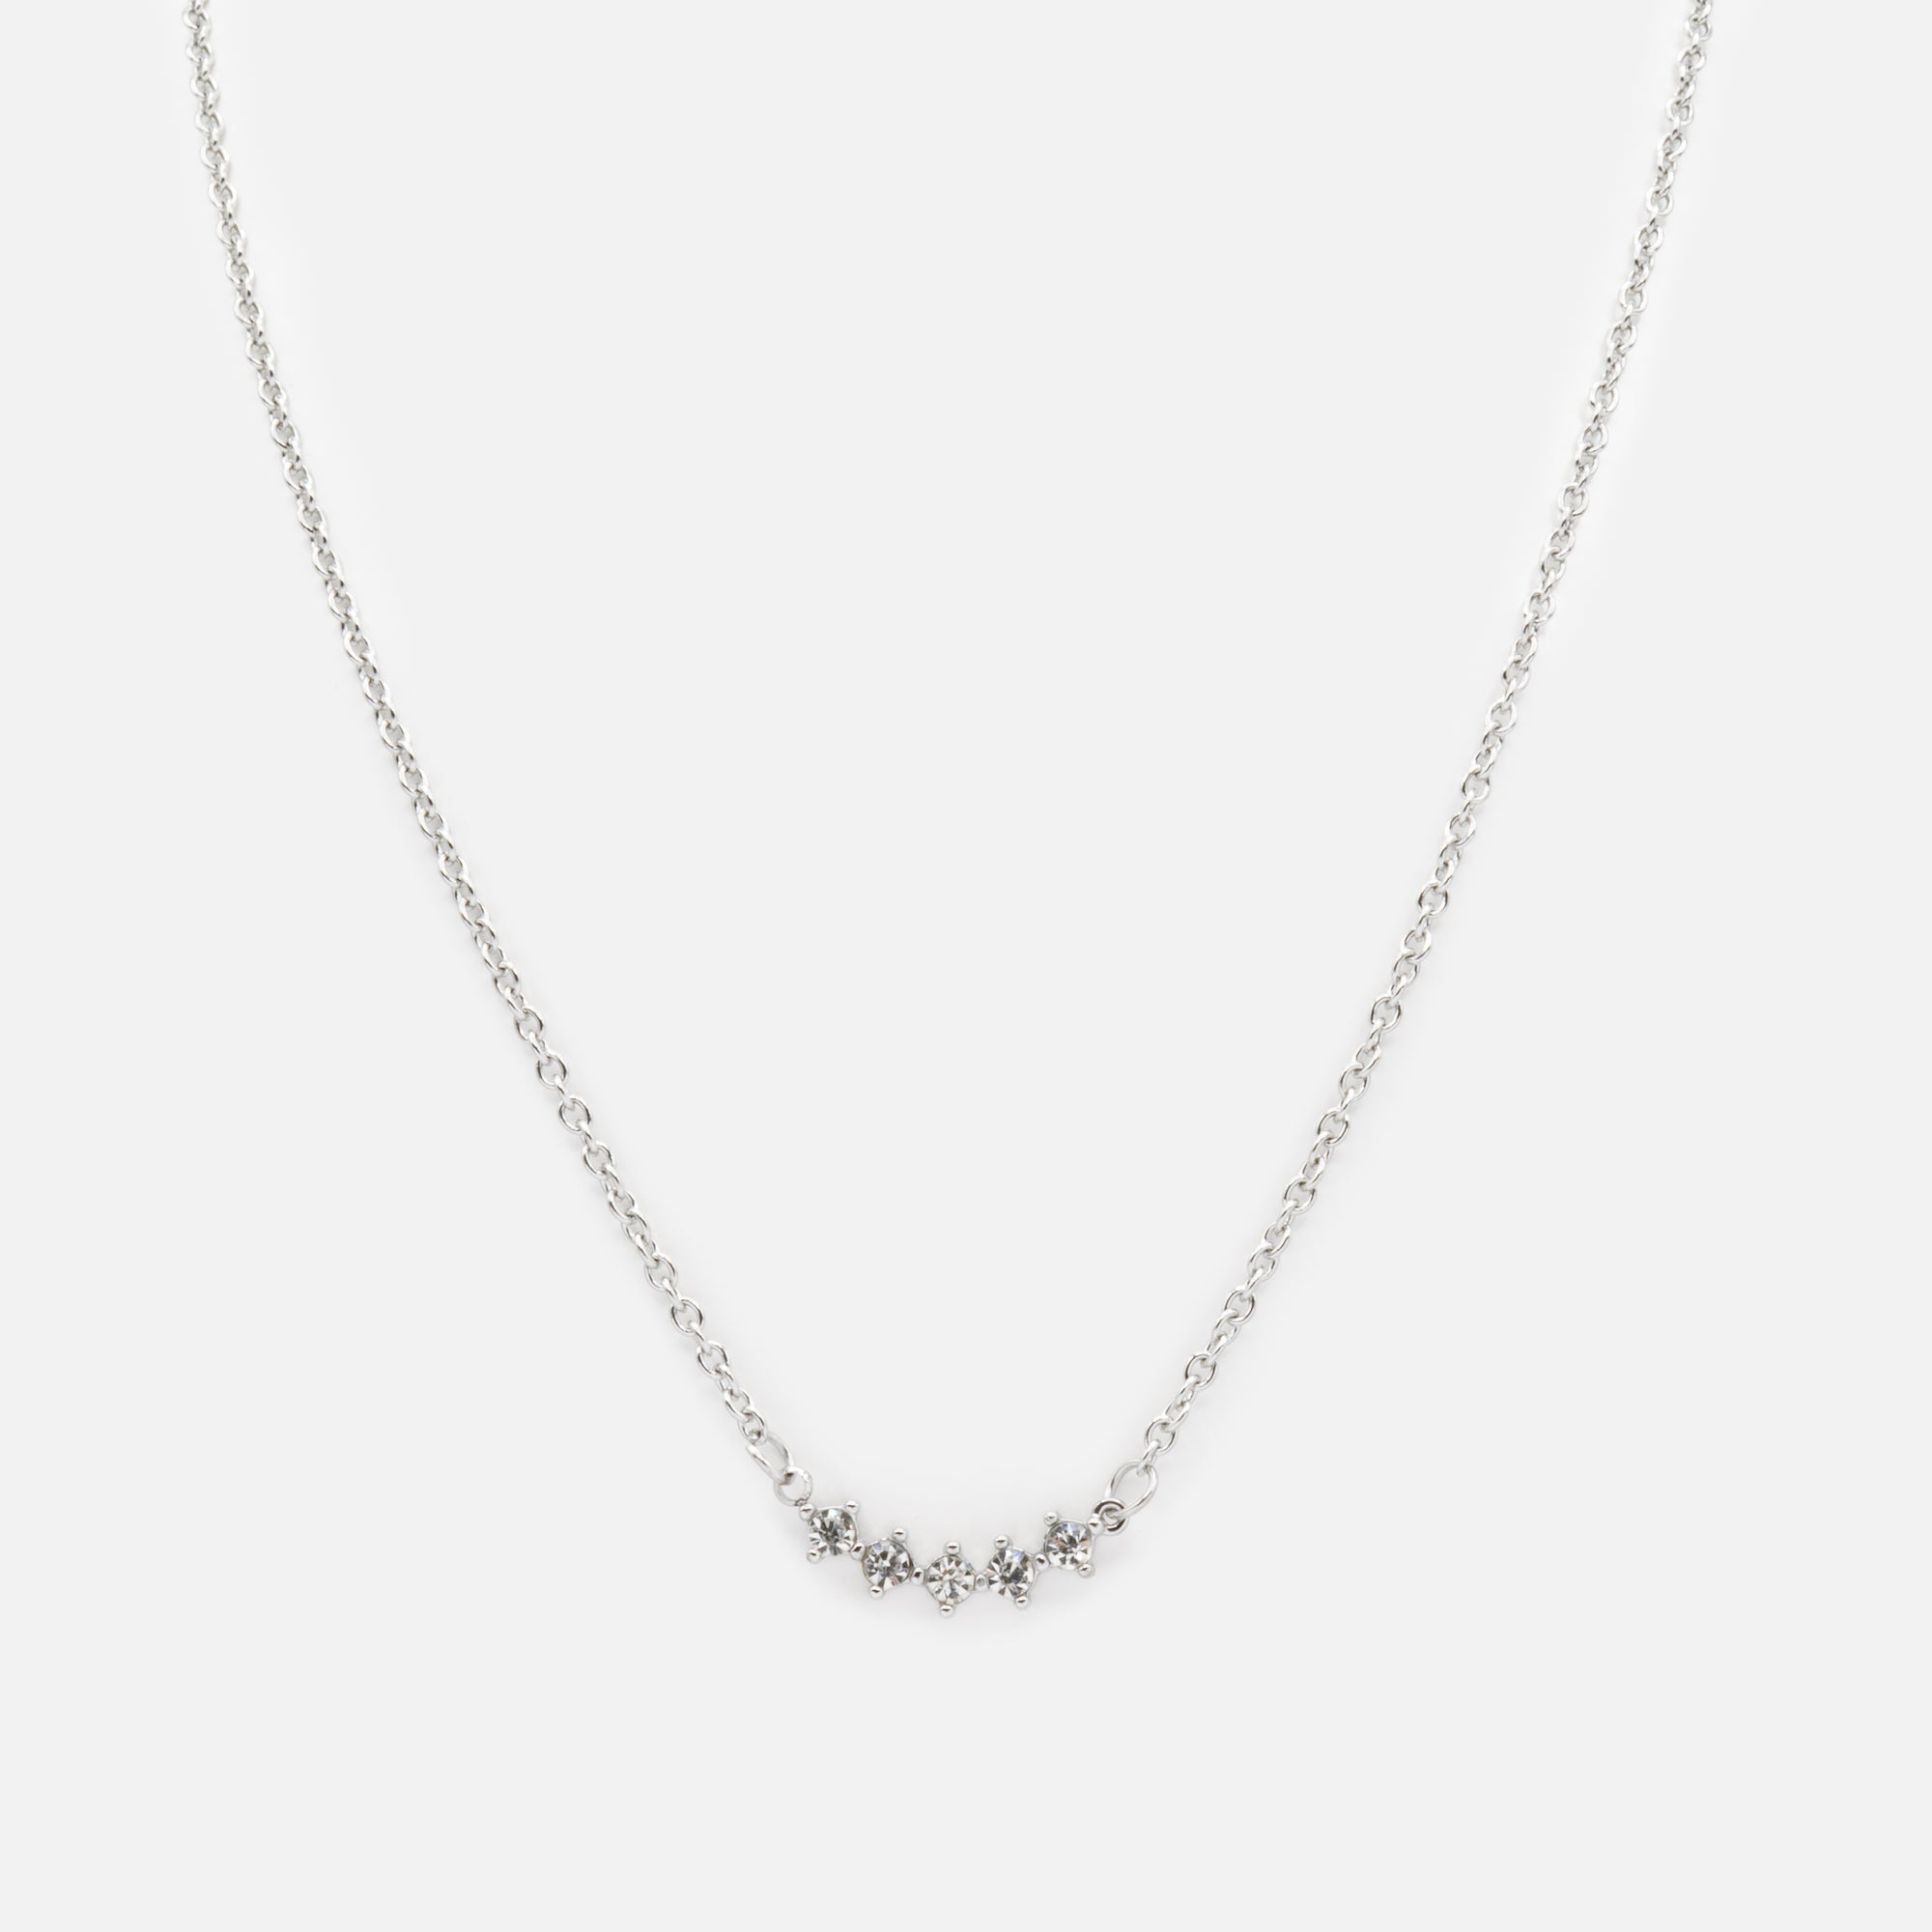 Silver necklace with its five cubic zirconias in stainless steel